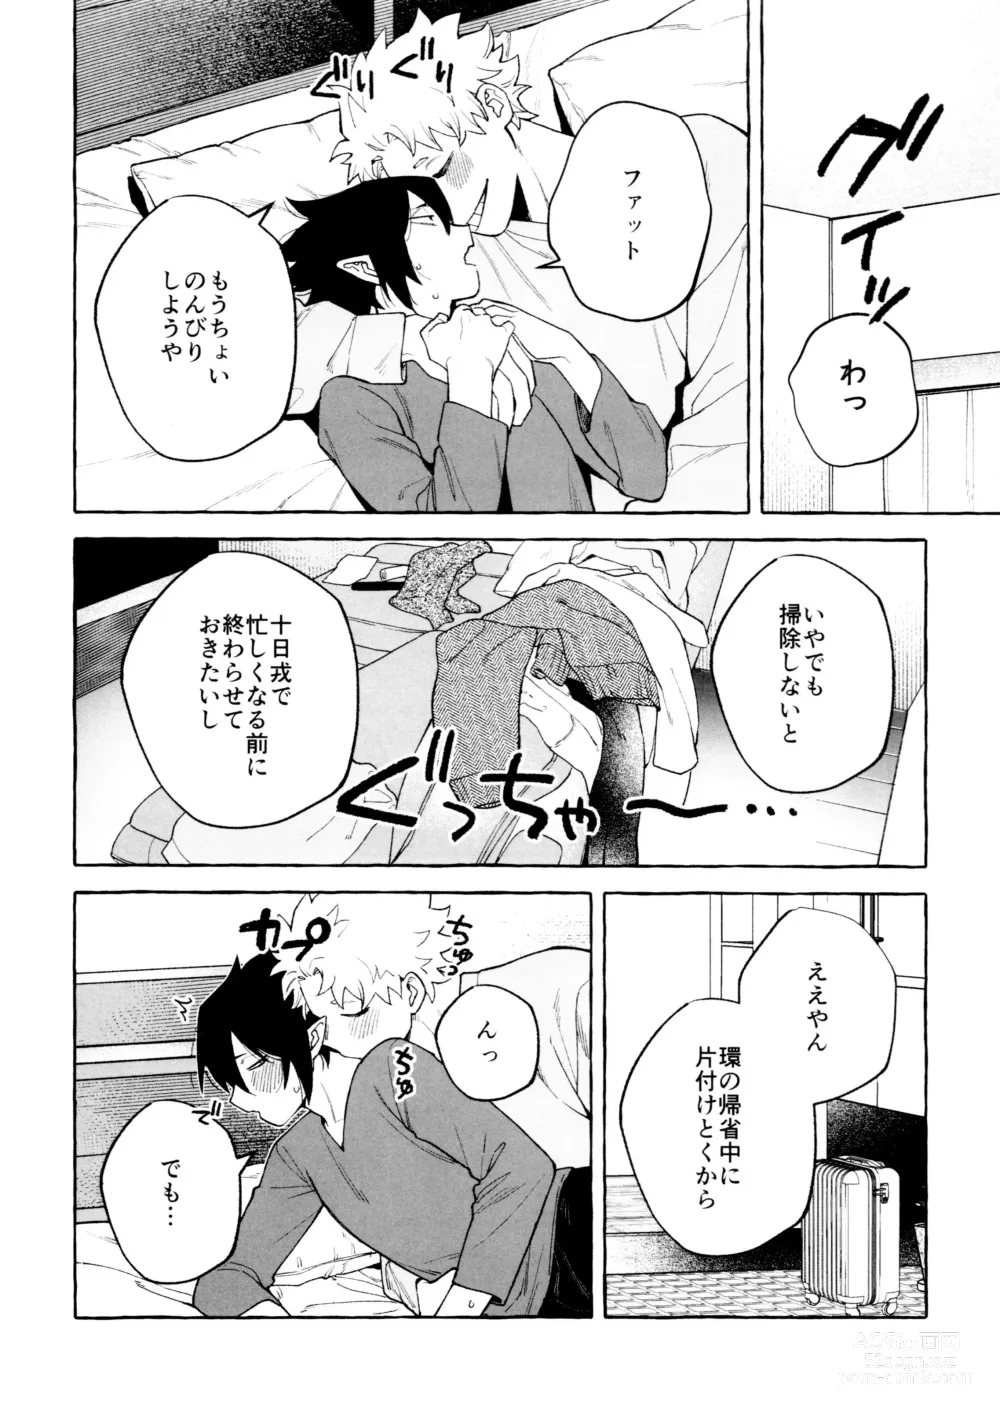 Page 6 of doujinshi Please please